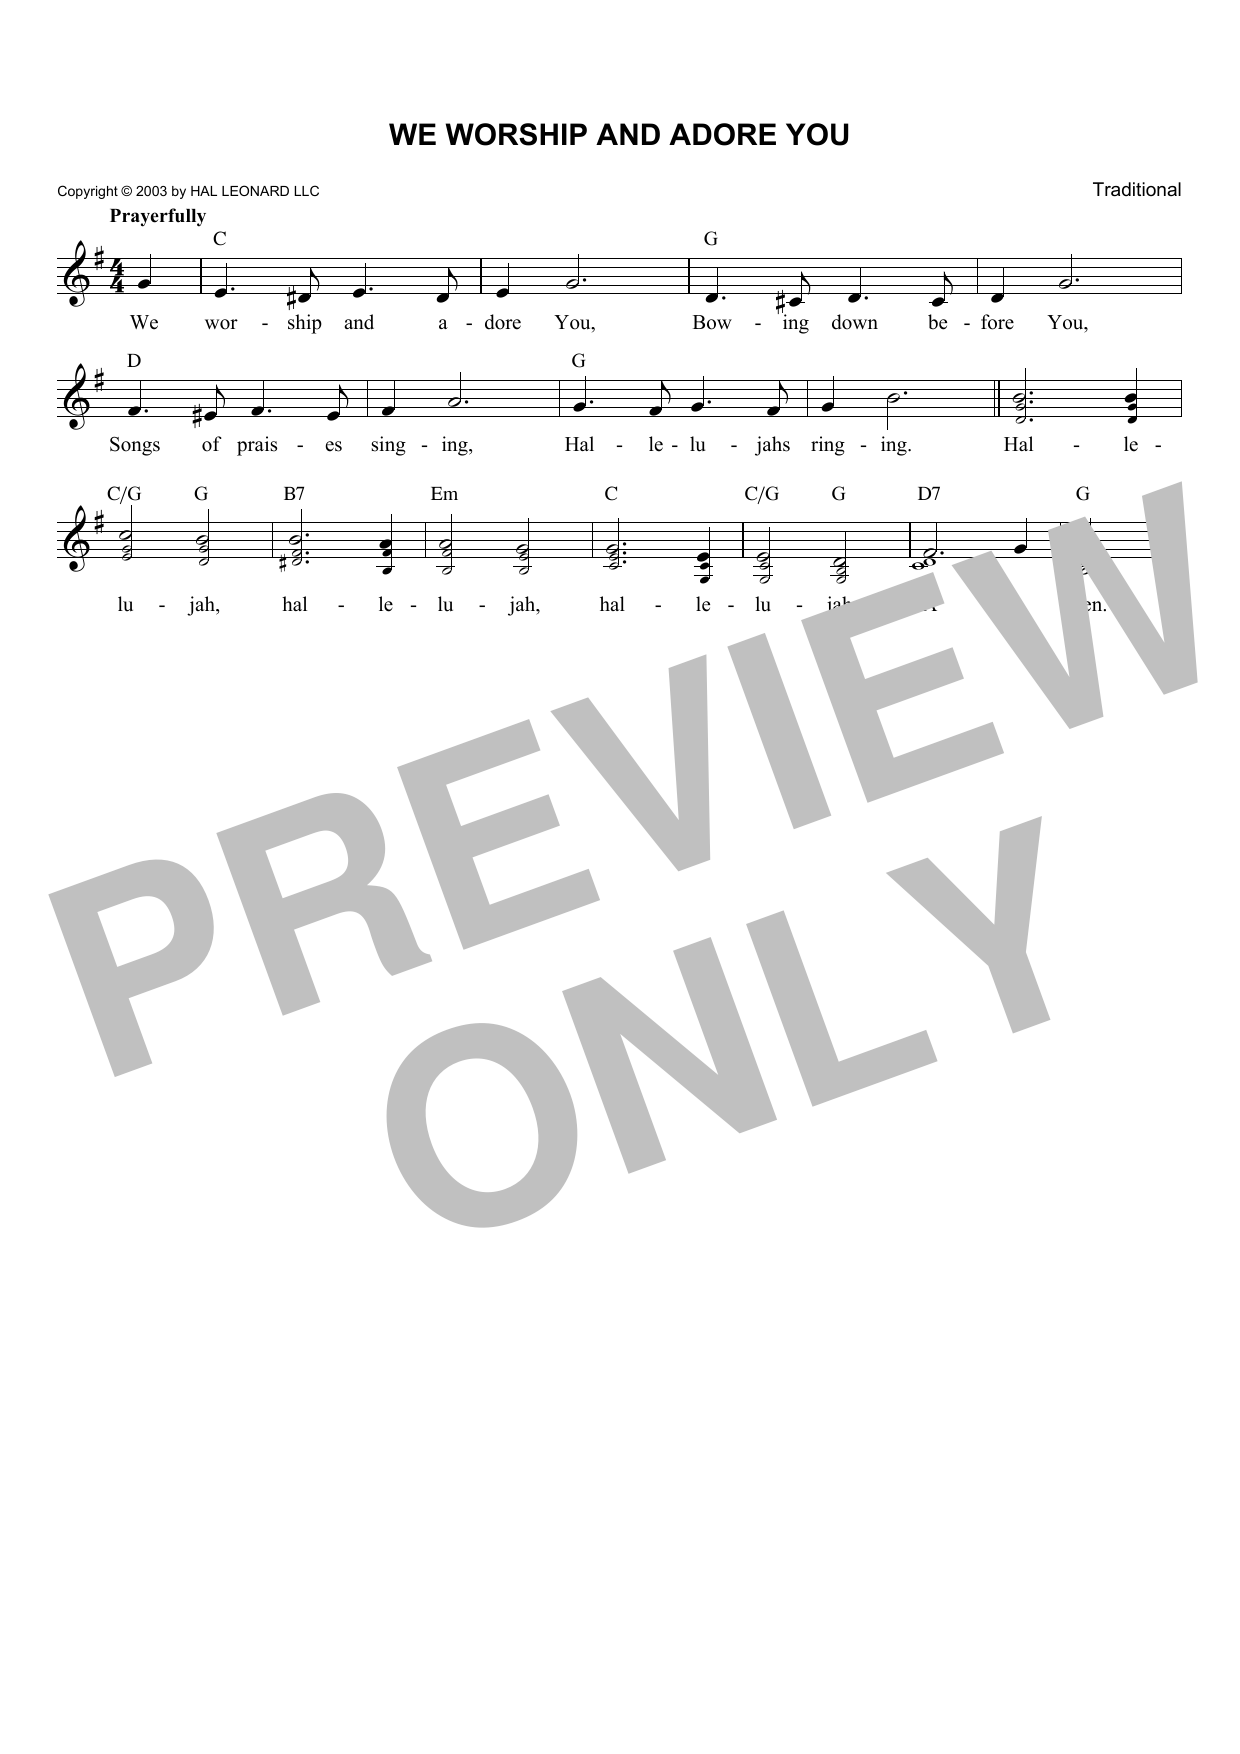 Download Traditional We Worship And Adore You Sheet Music